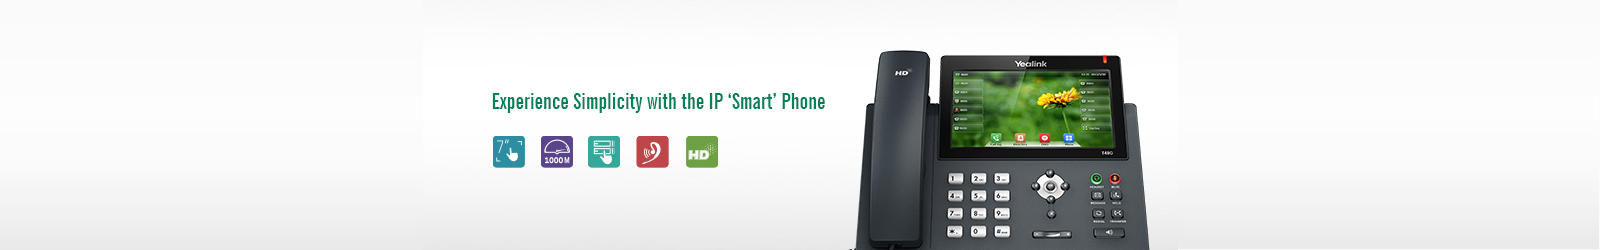 Yealink IP phone series include the Ultra-elegant T4 series, the upgrade T2 series and the Skype for Business series